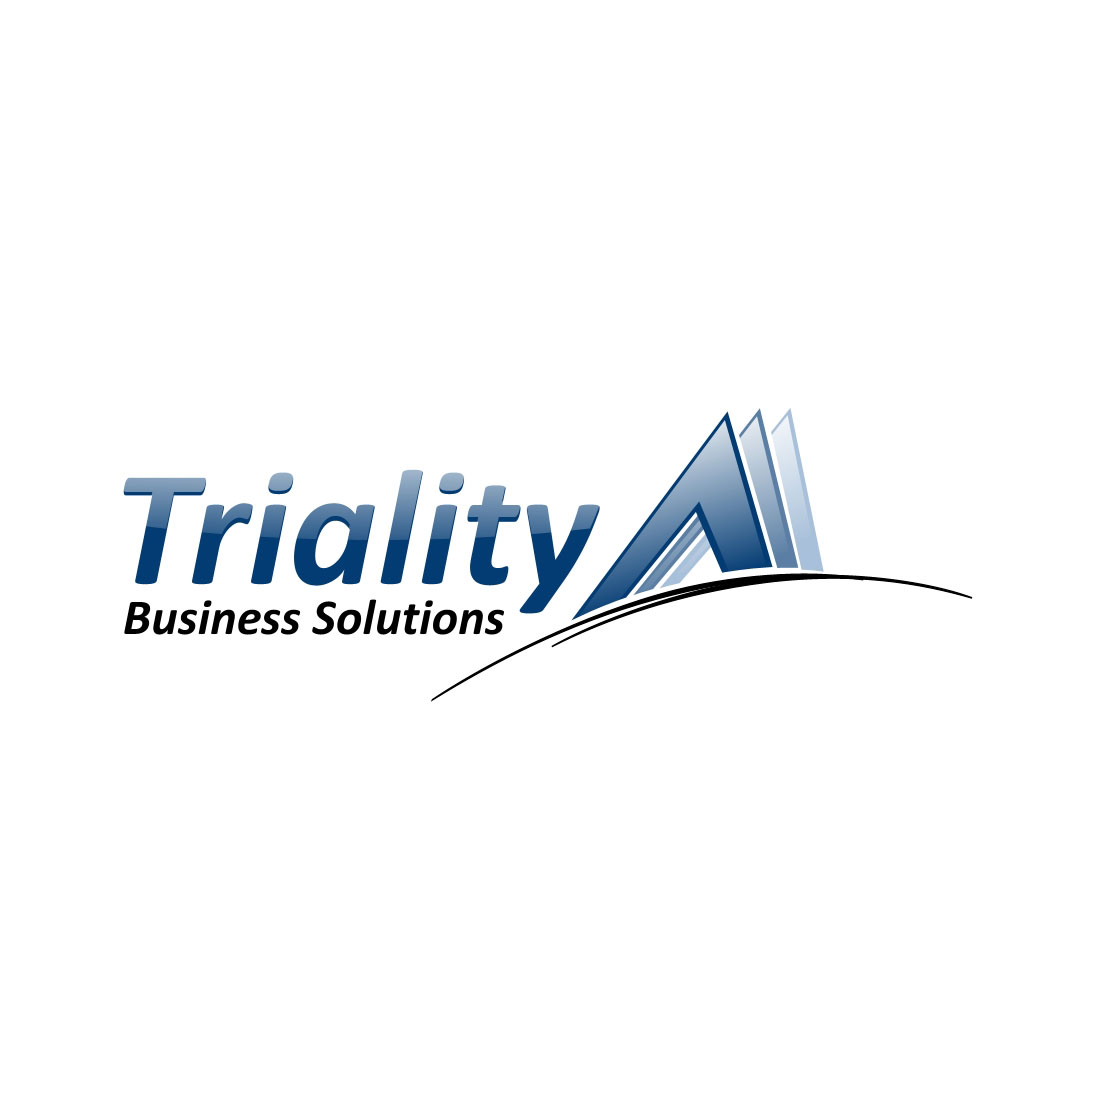 Triality Business Solutions Logo